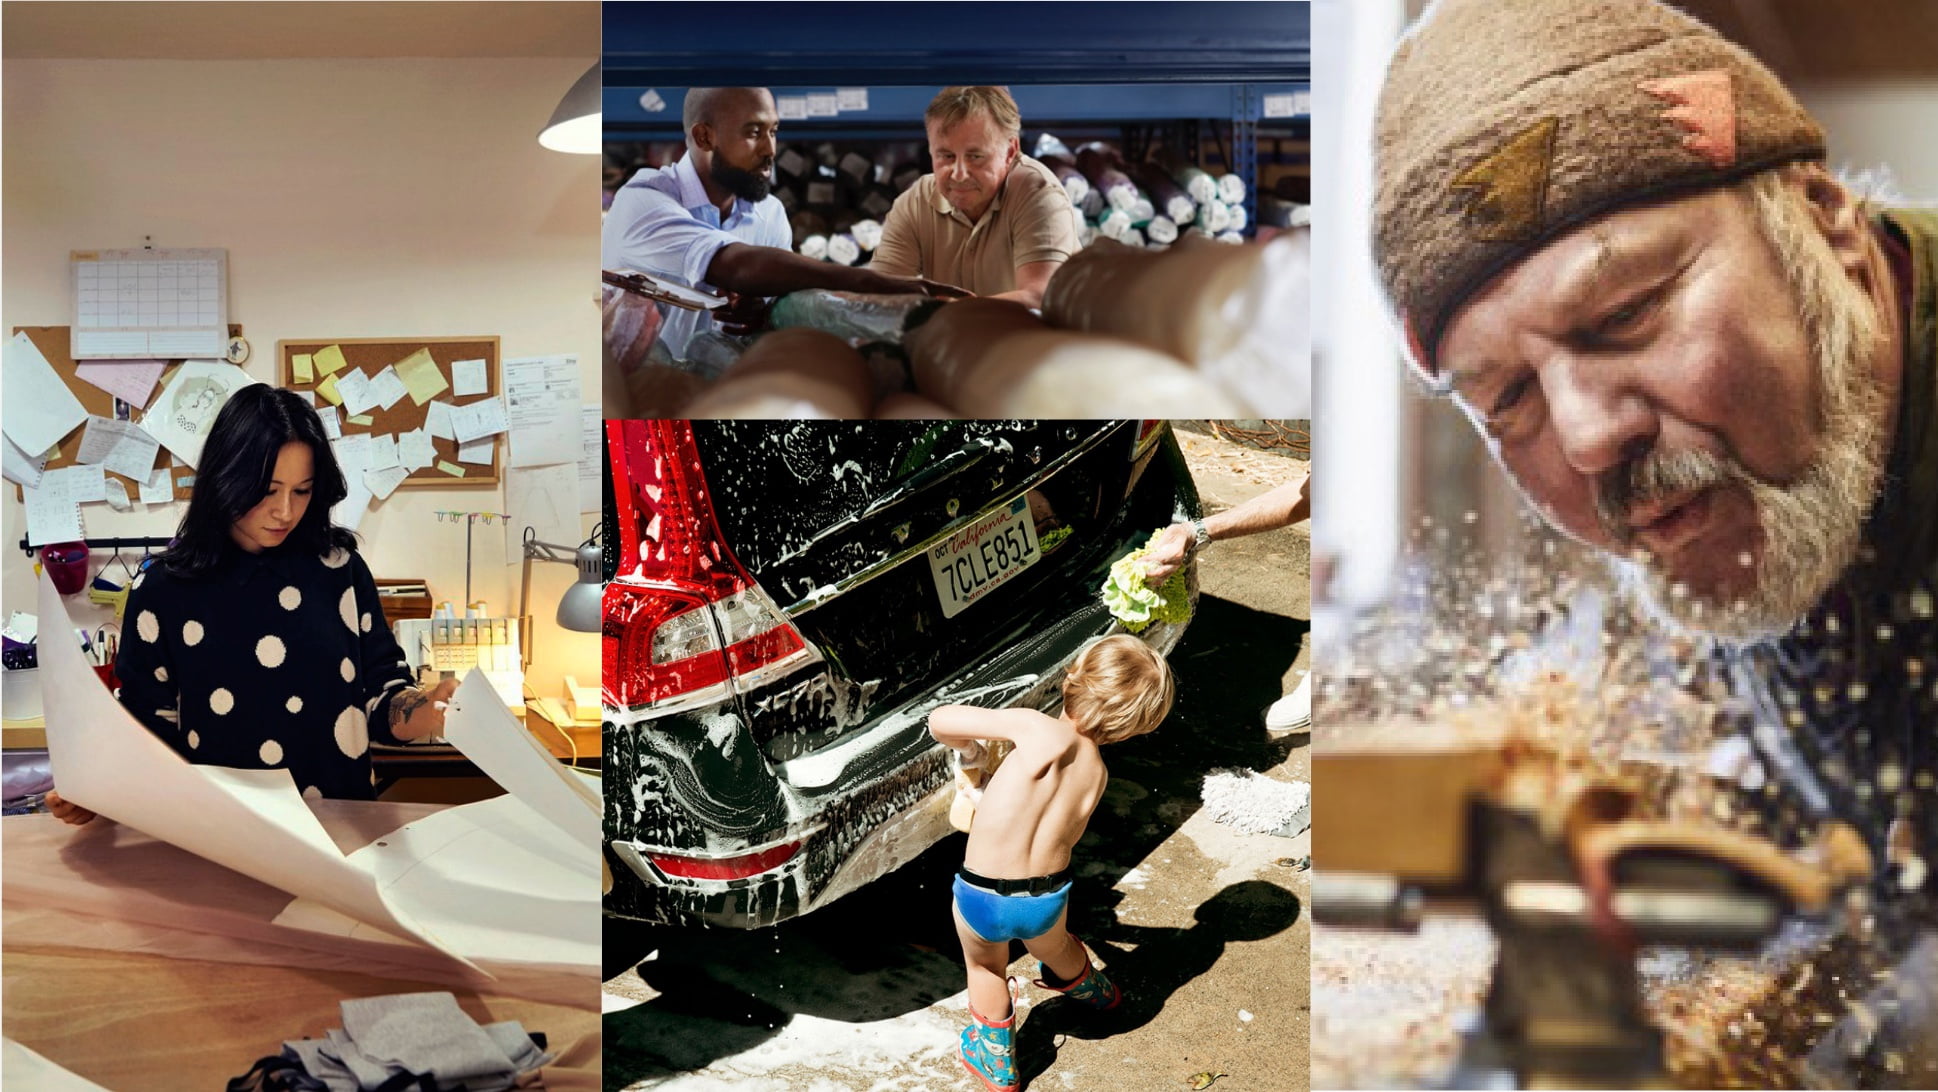 Collage of images featuring different people in various work settings.